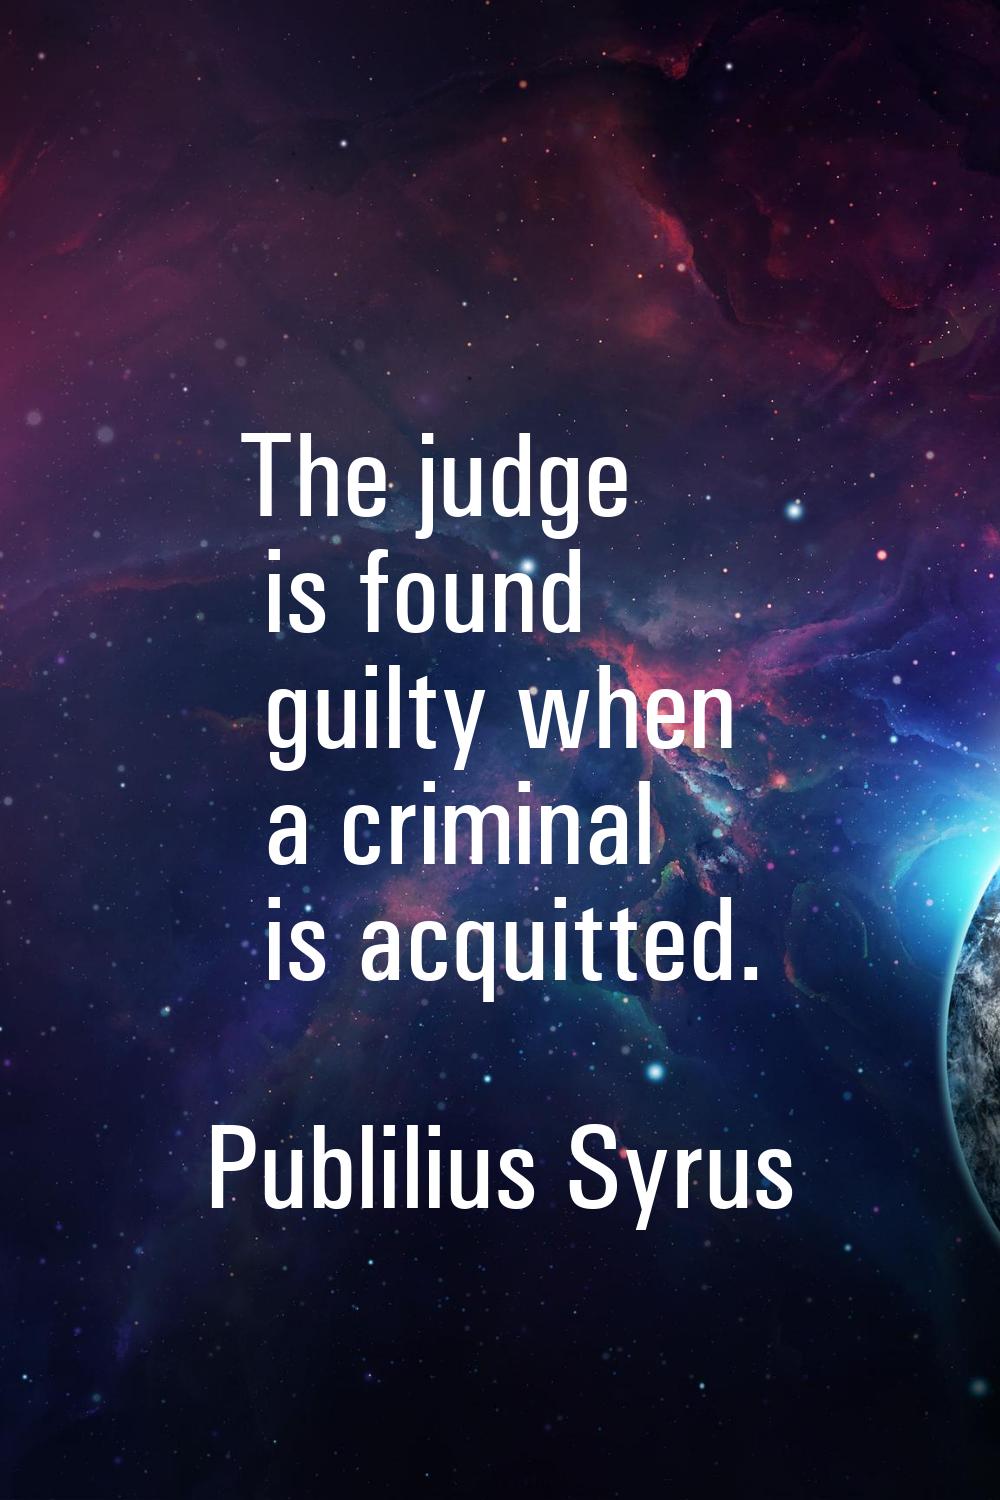 The judge is found guilty when a criminal is acquitted.